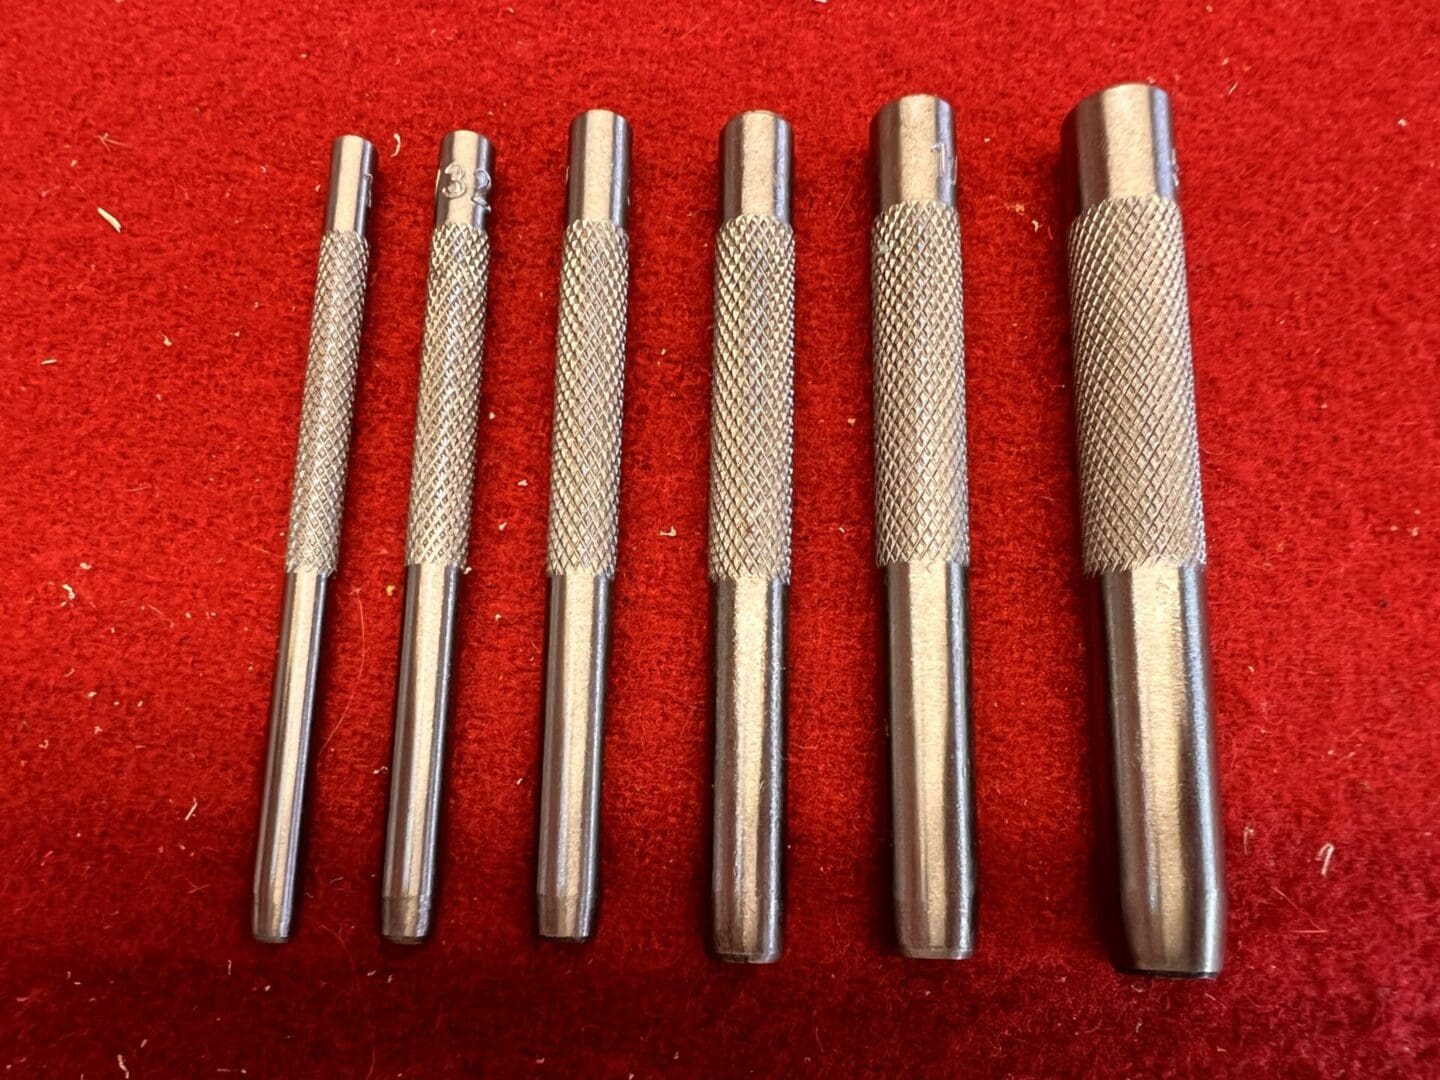 6pc Hollow Metal Leather Punch Set Punches L3-101